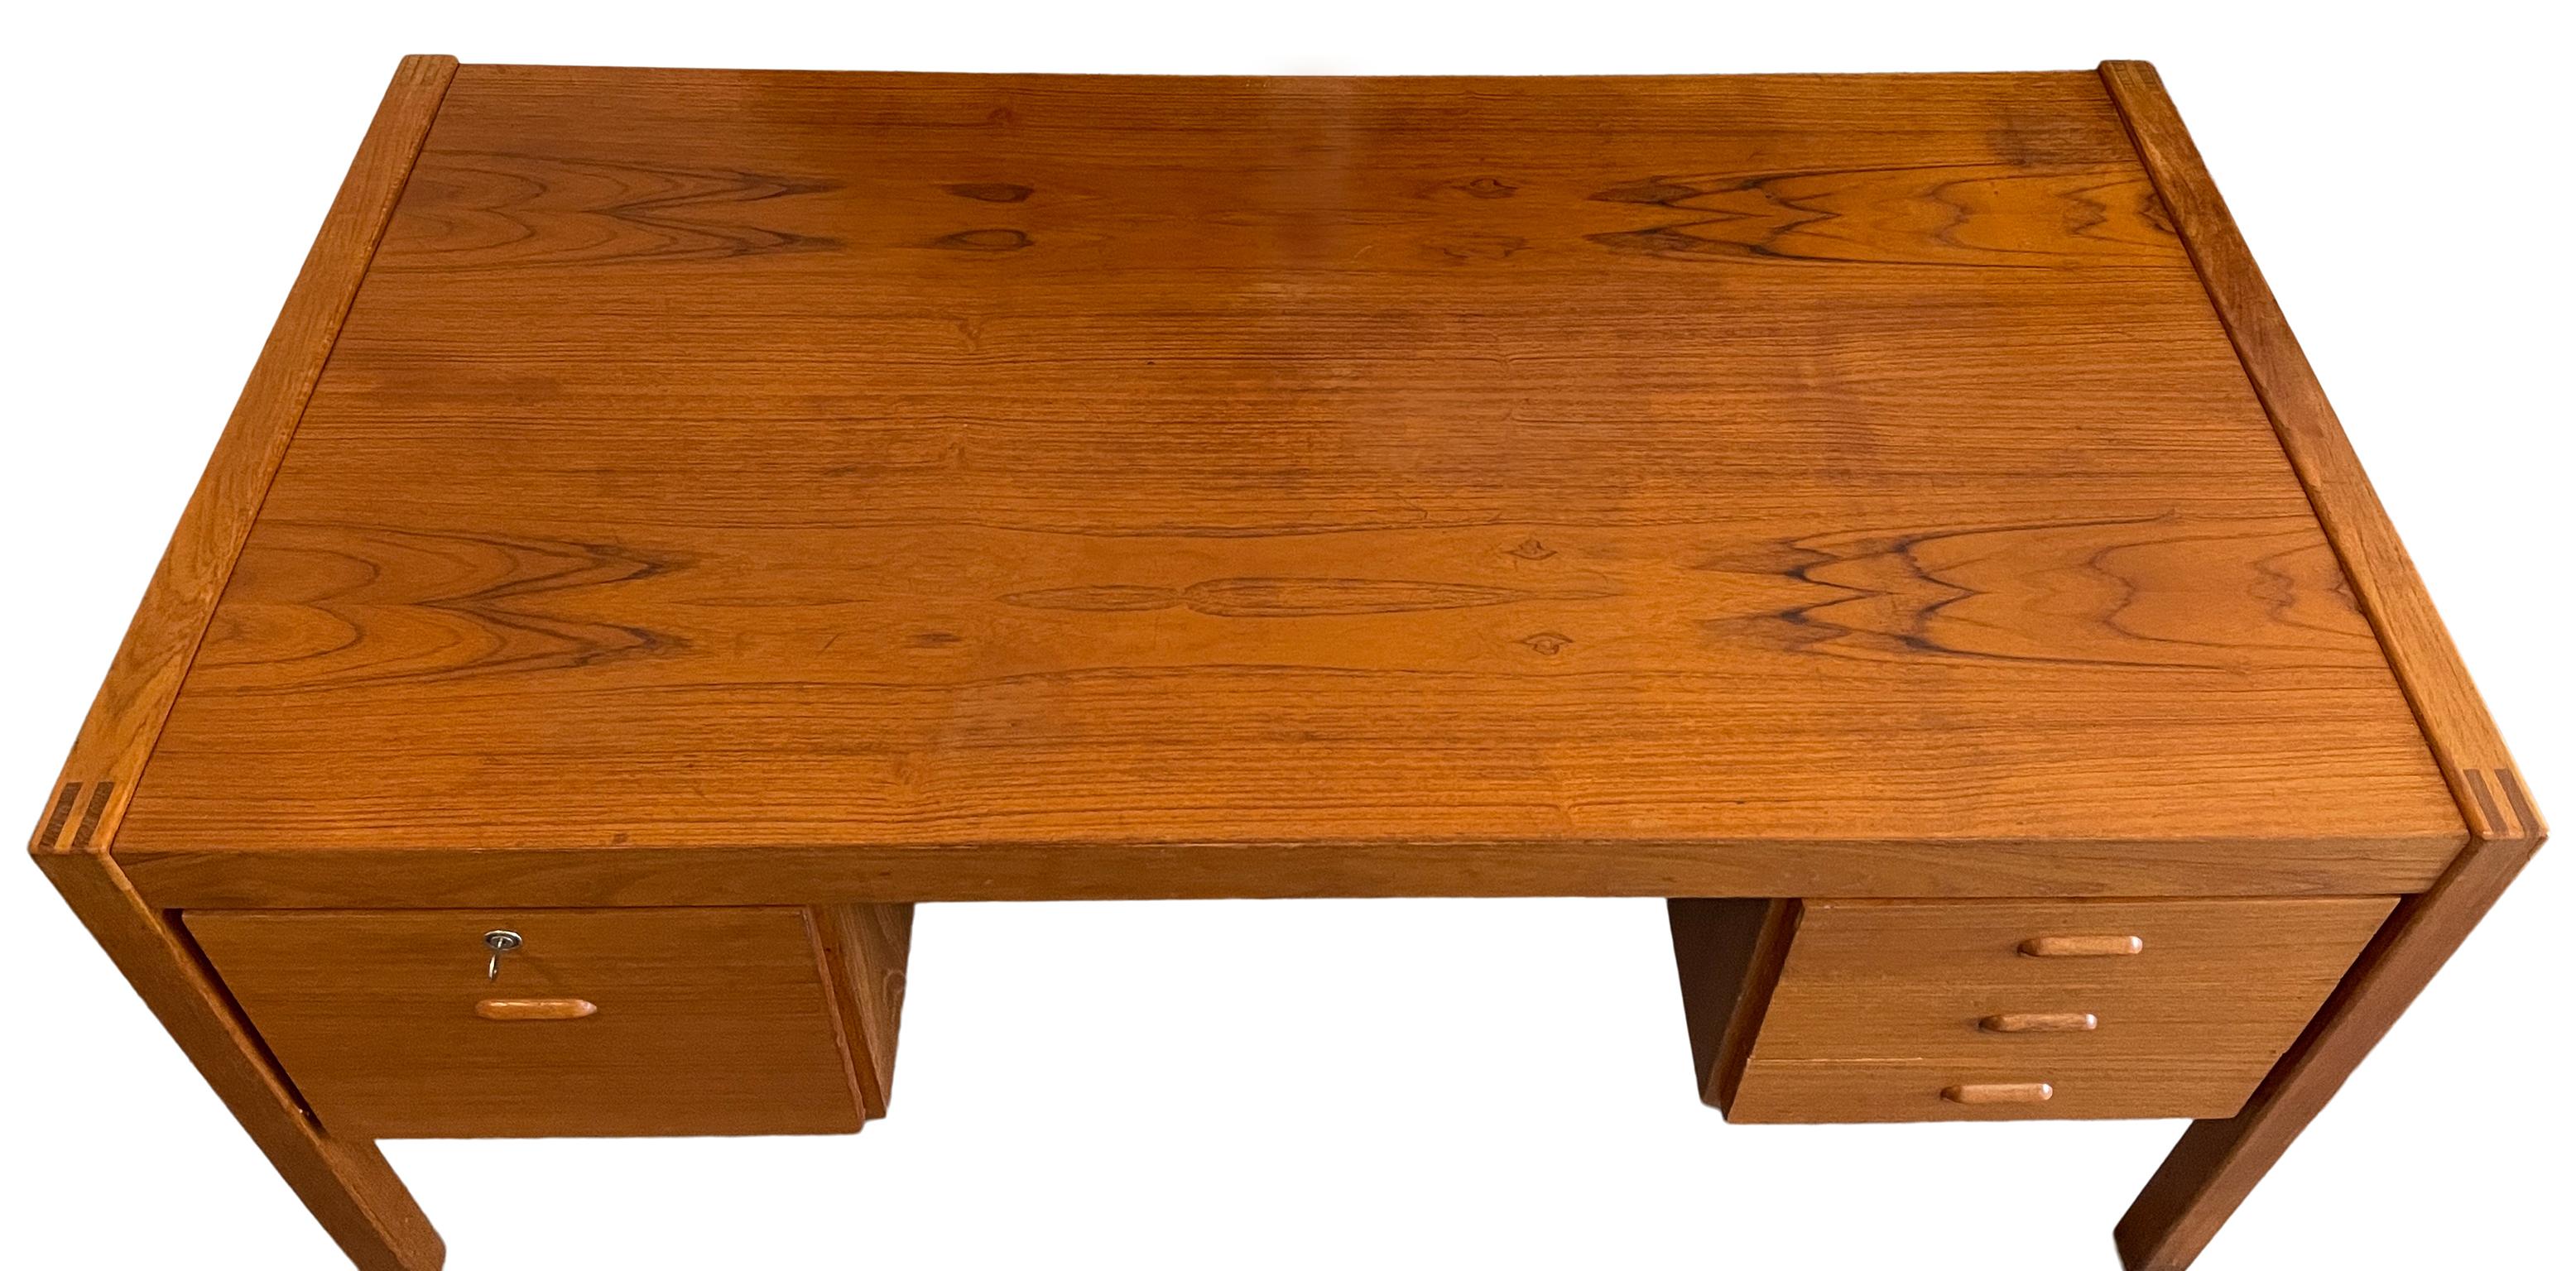 Mid century Danish modern teak knee hole 4 drawer desk with key. Beautiful wood grain on top great construction details - solid wood handles. Made in Denmark.